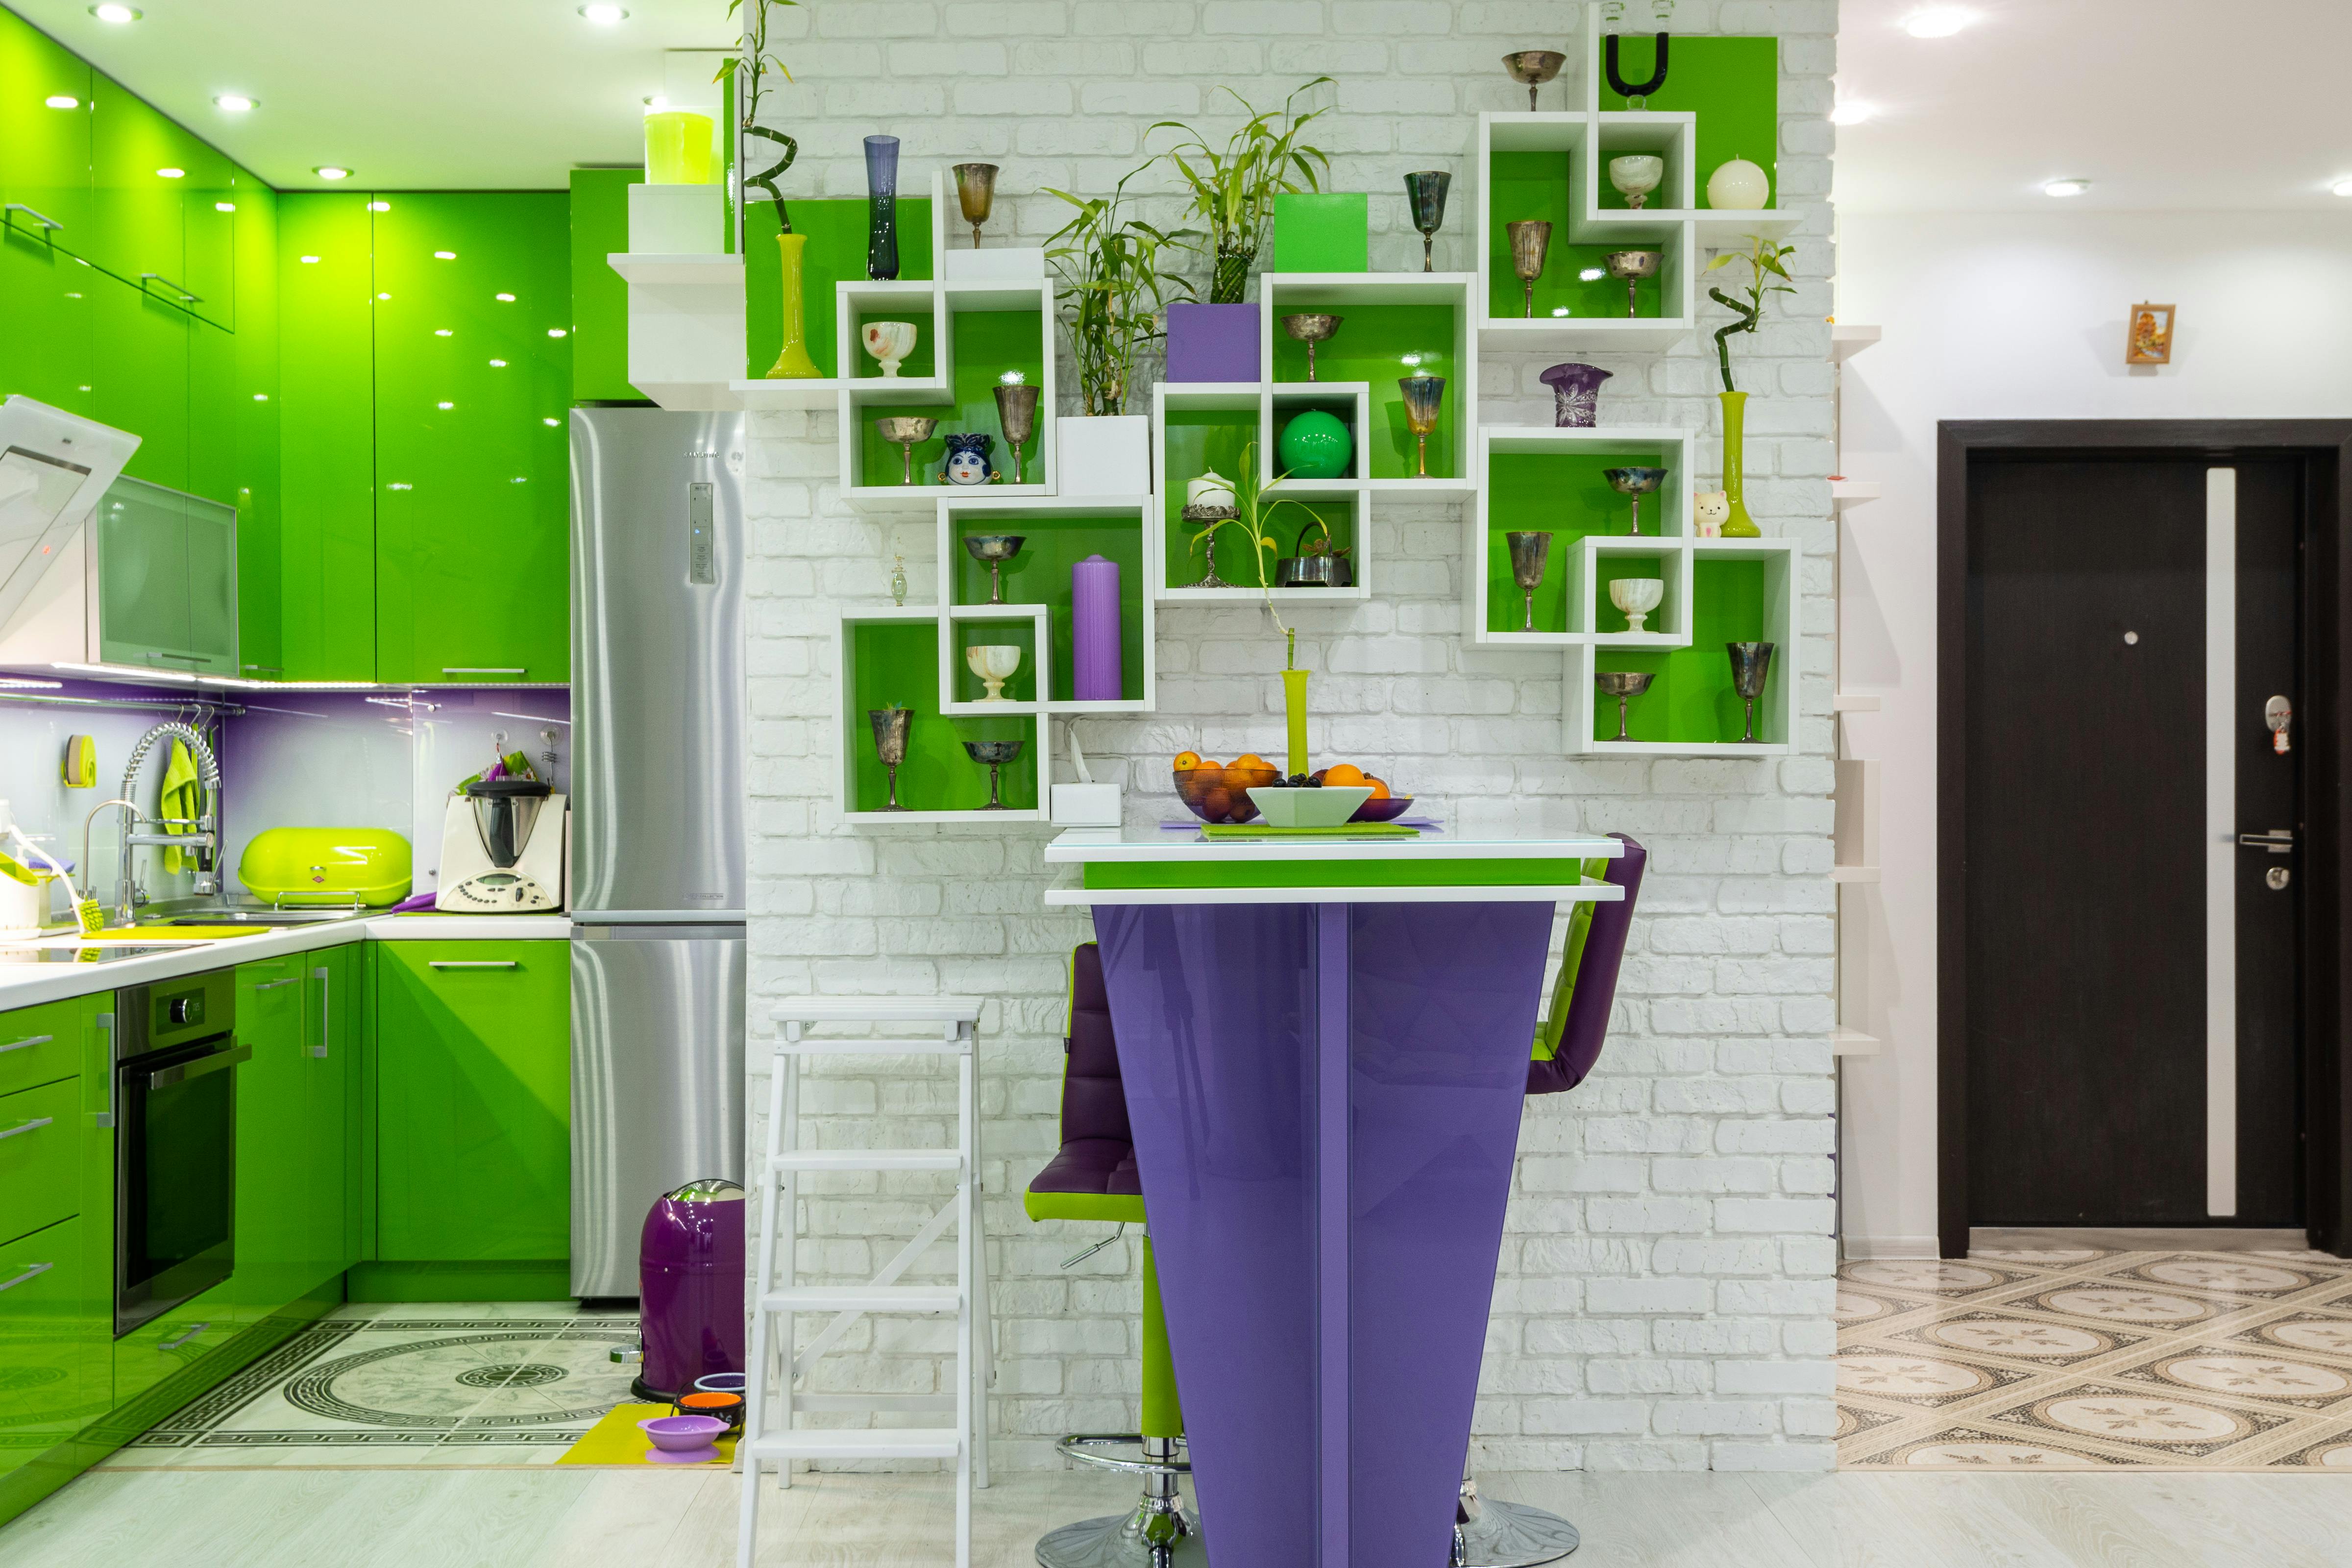 interior of creative kitchen with green cupboards and shelves with various decorative elements